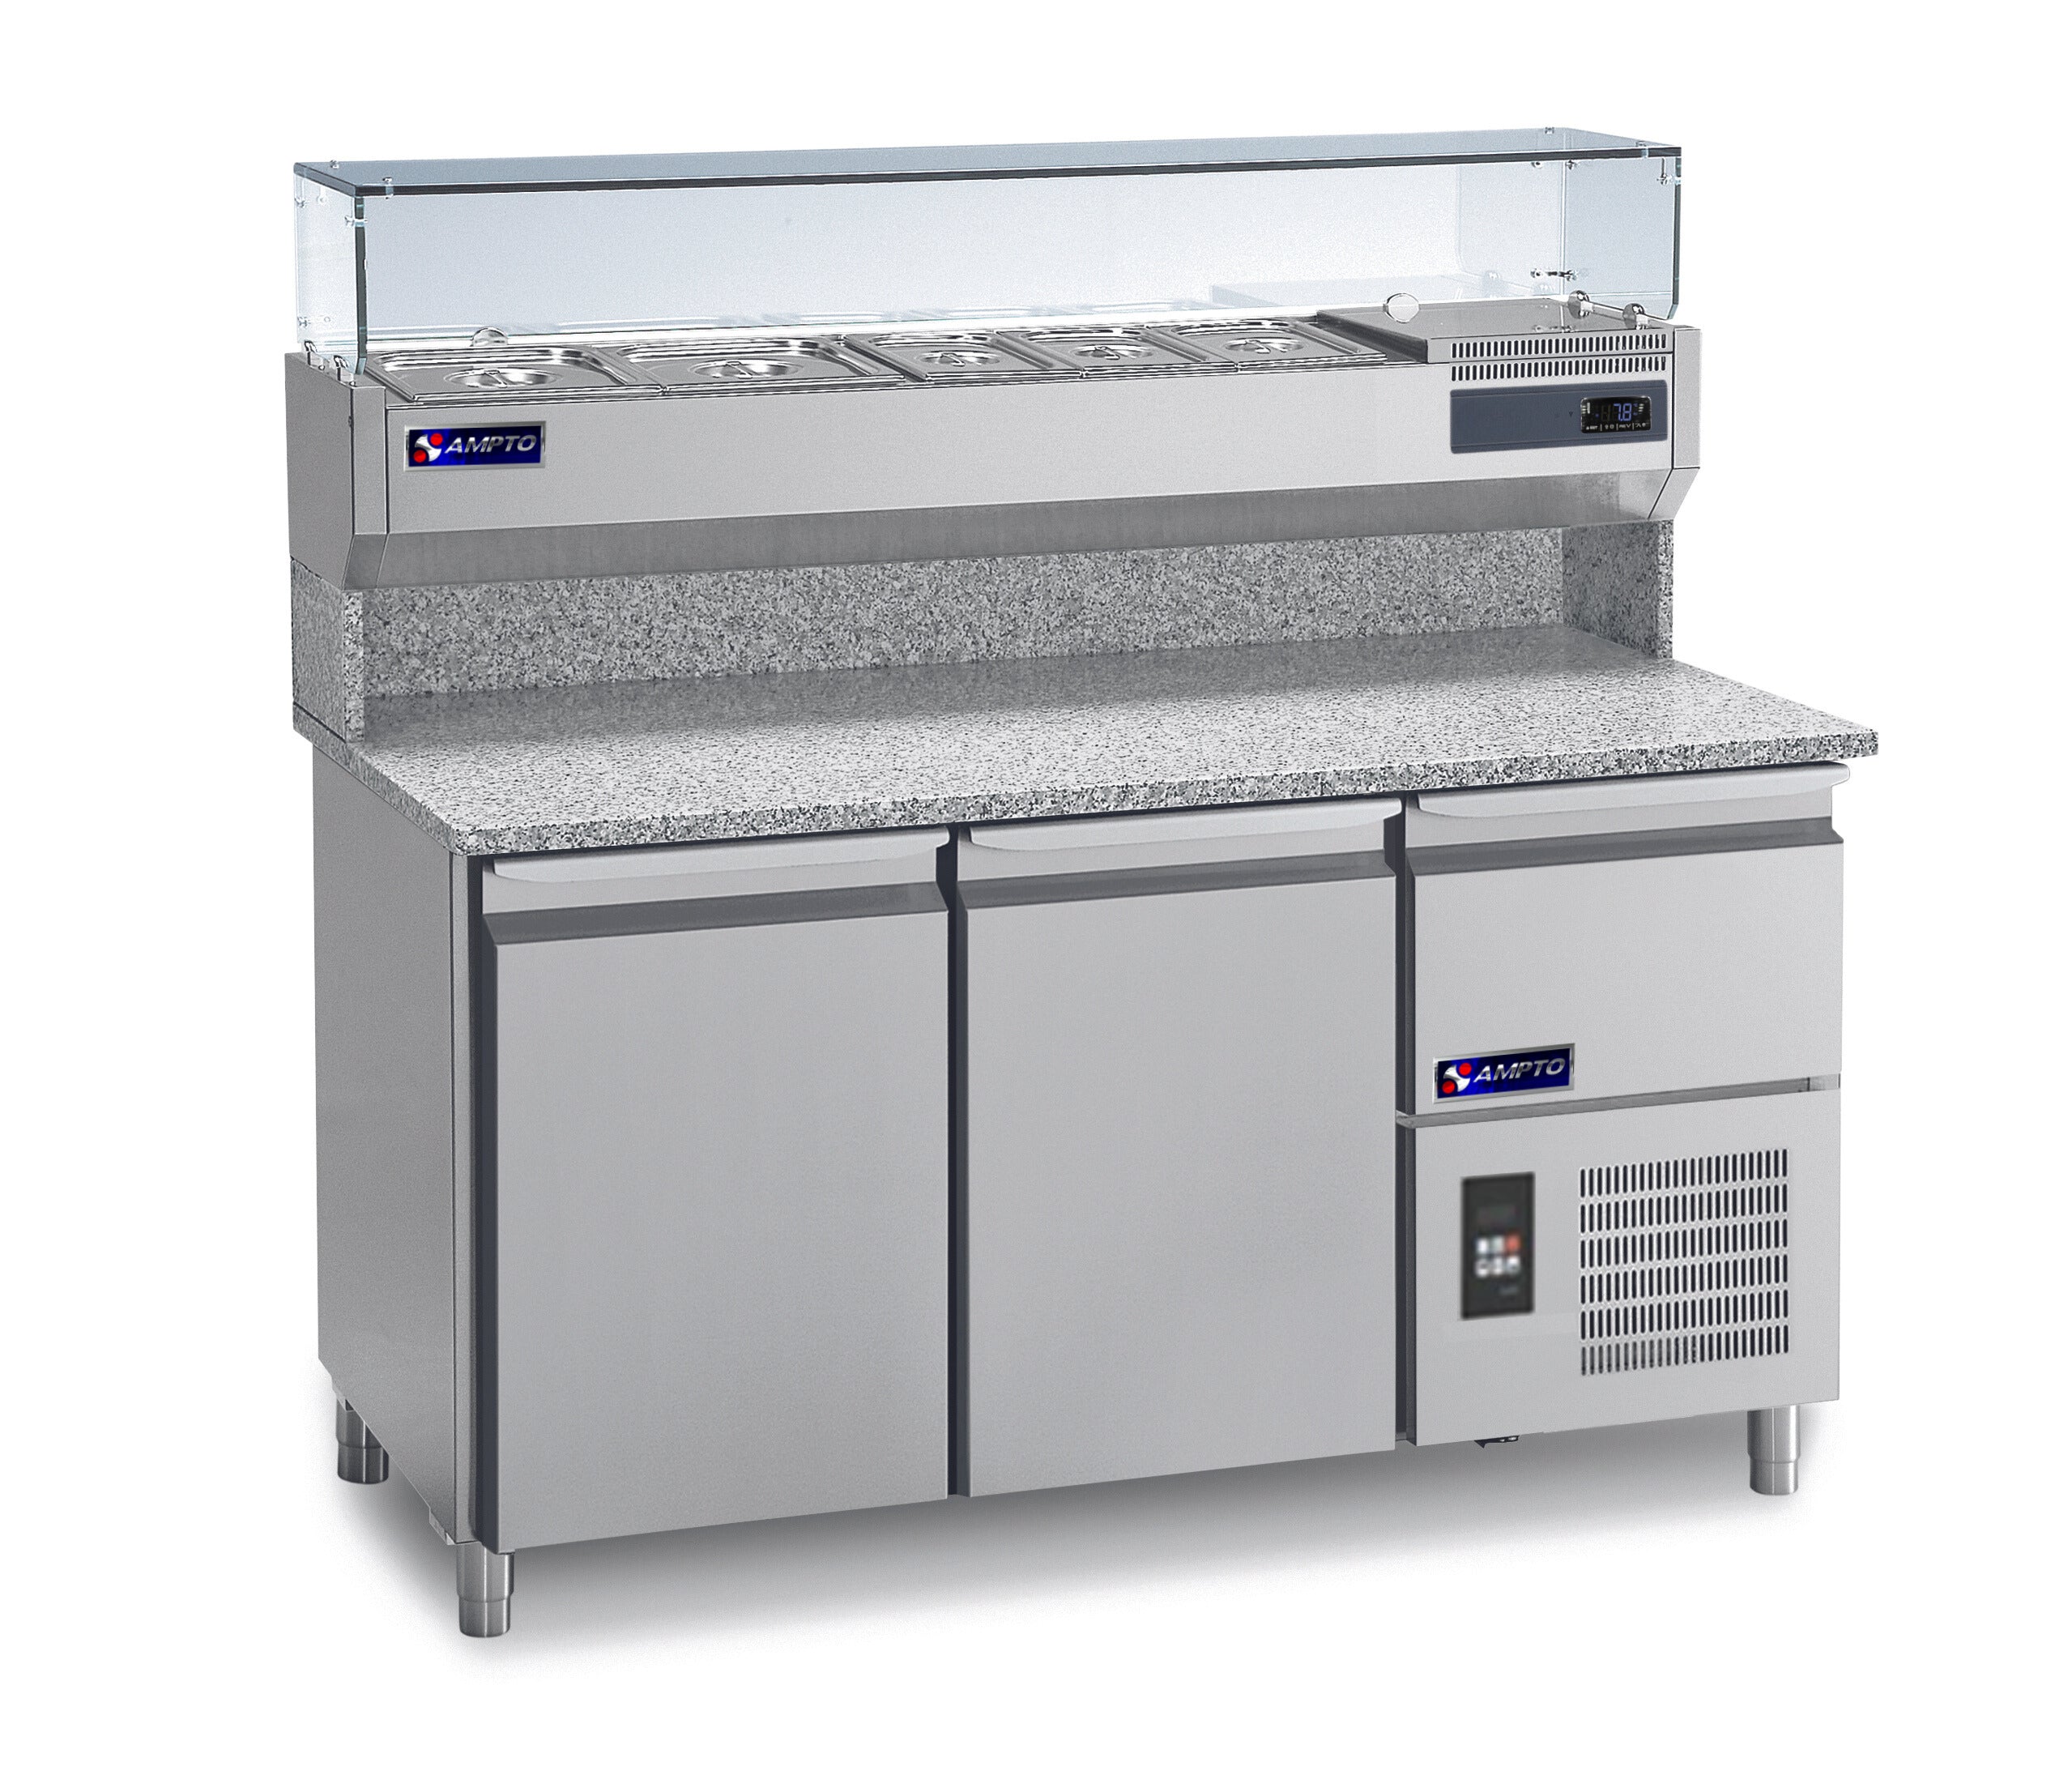 MPP-2US - Pizza Prep Table Refrigerated Granite 2 section with top rail